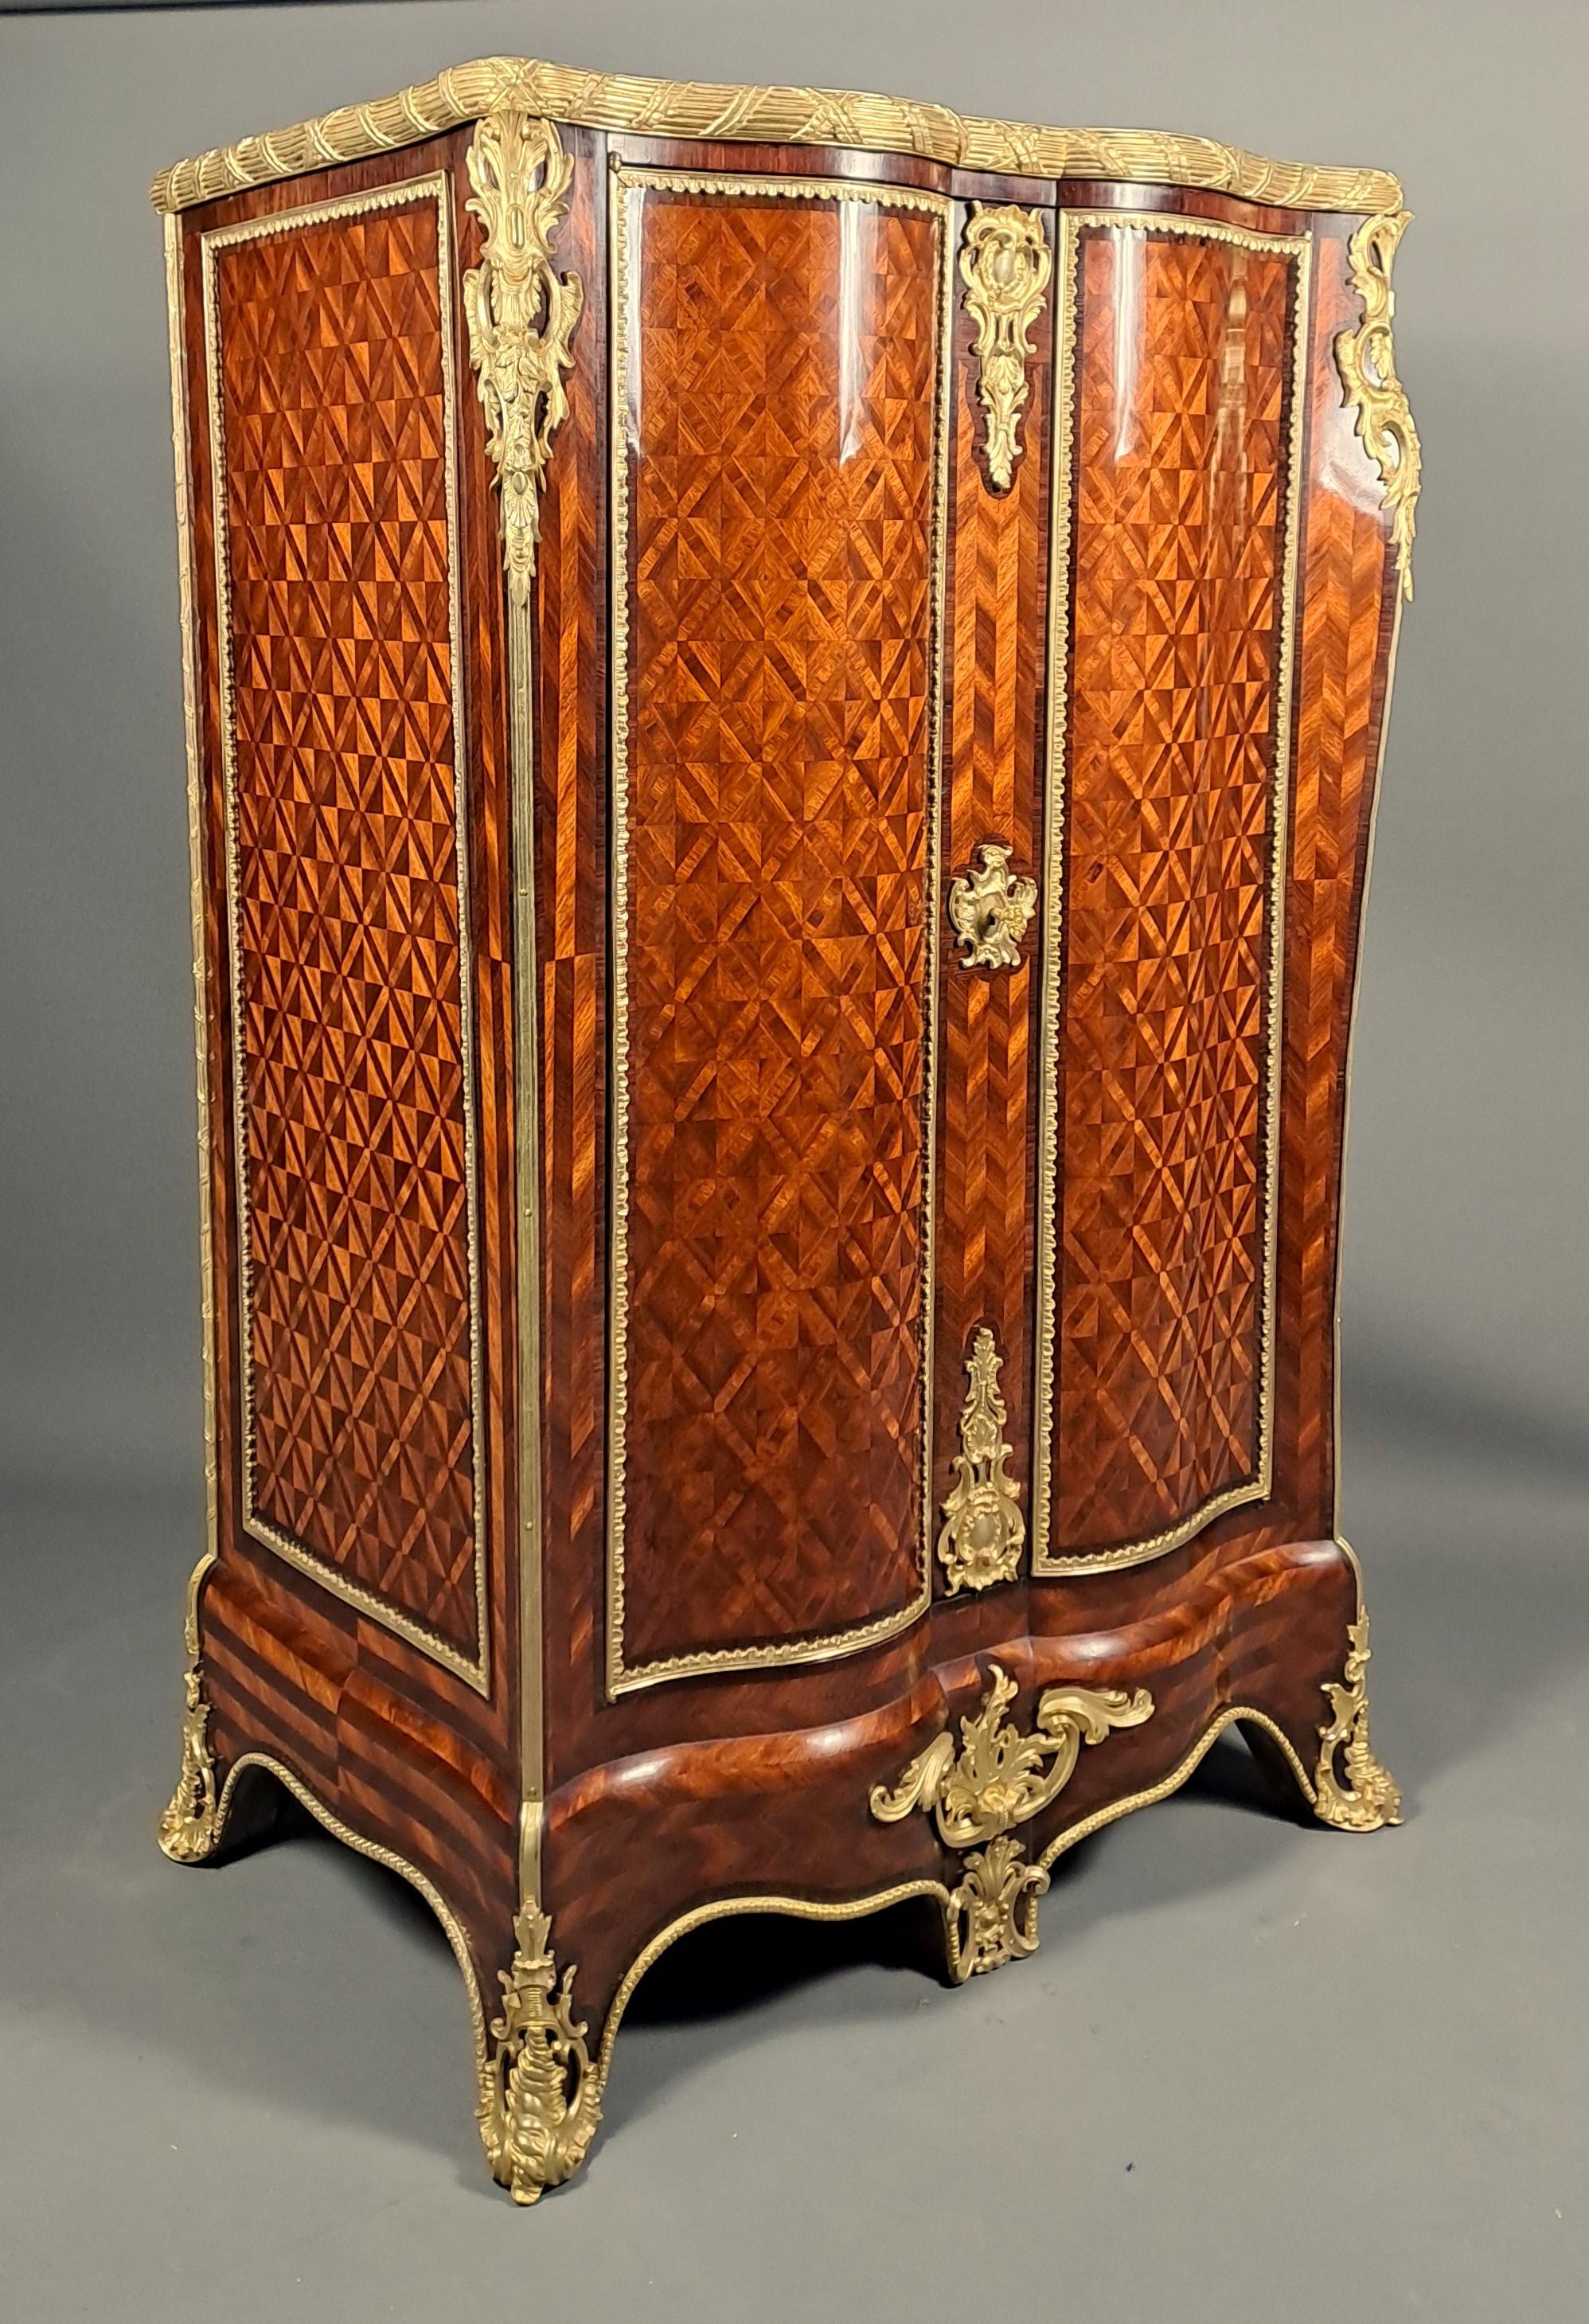 Important Cabinet Stamped Beurdeley In Paris 3